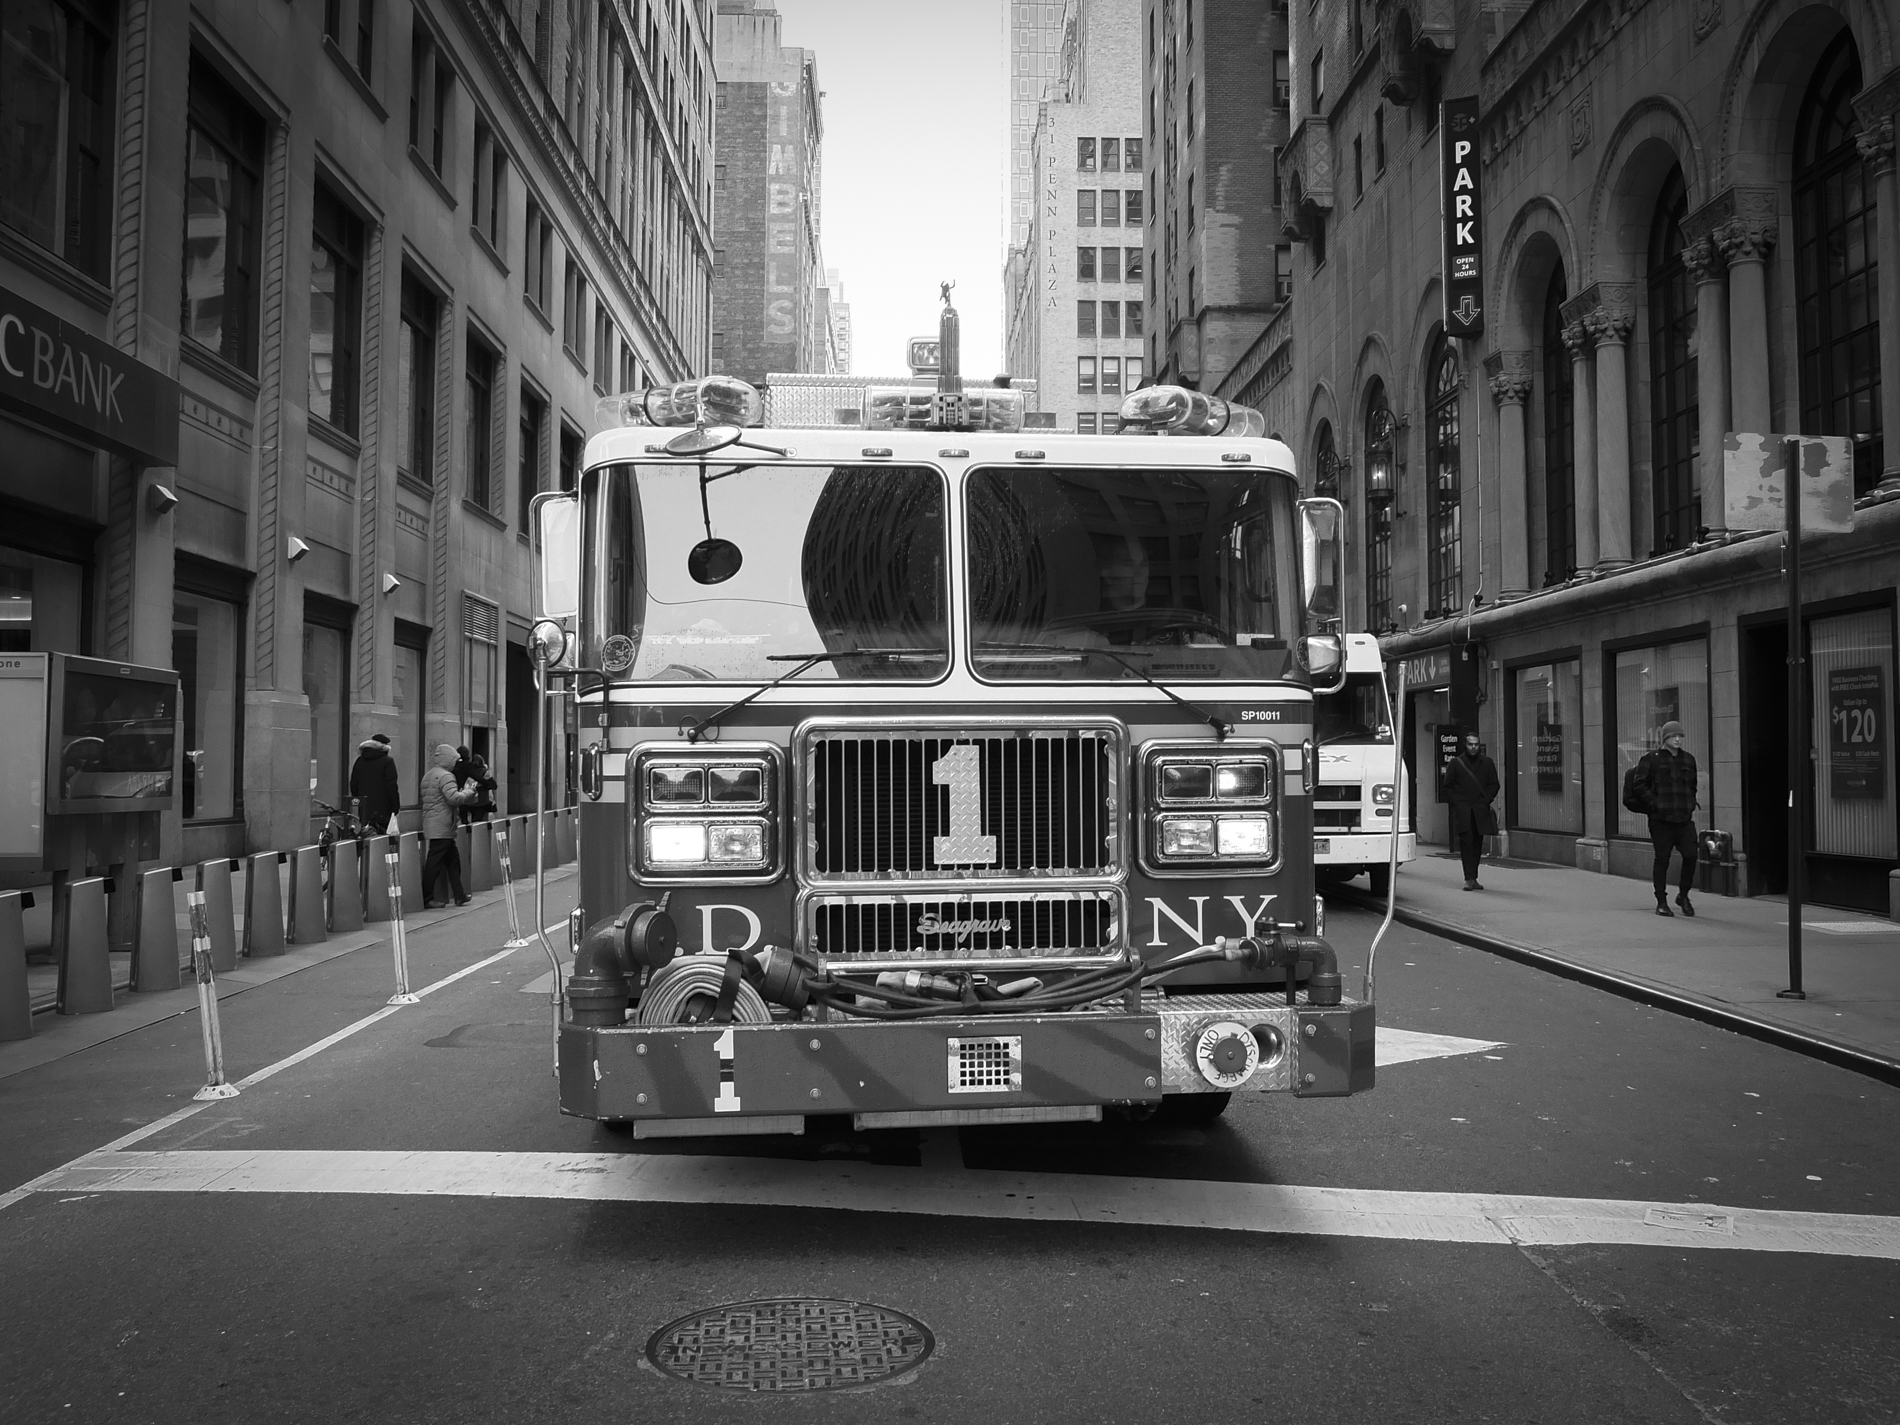 New York Fire Department on the road in Manhattan